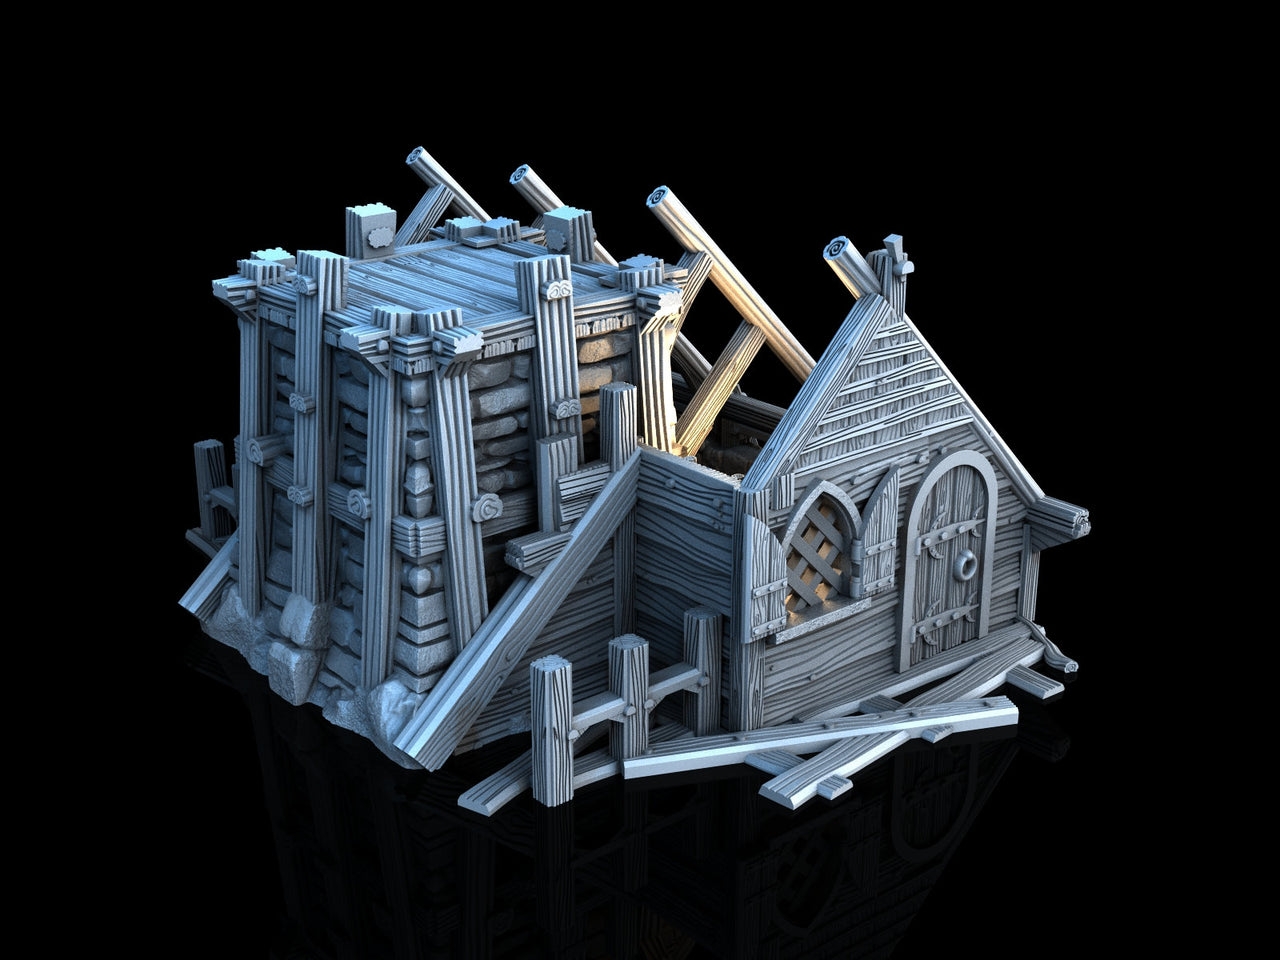 Ruined House 2 - 3DP4U Medieval Town | Miniature | Wargaming | Roleplaying Games | 32mm | Ruin | Playable | Filament | 3d printed